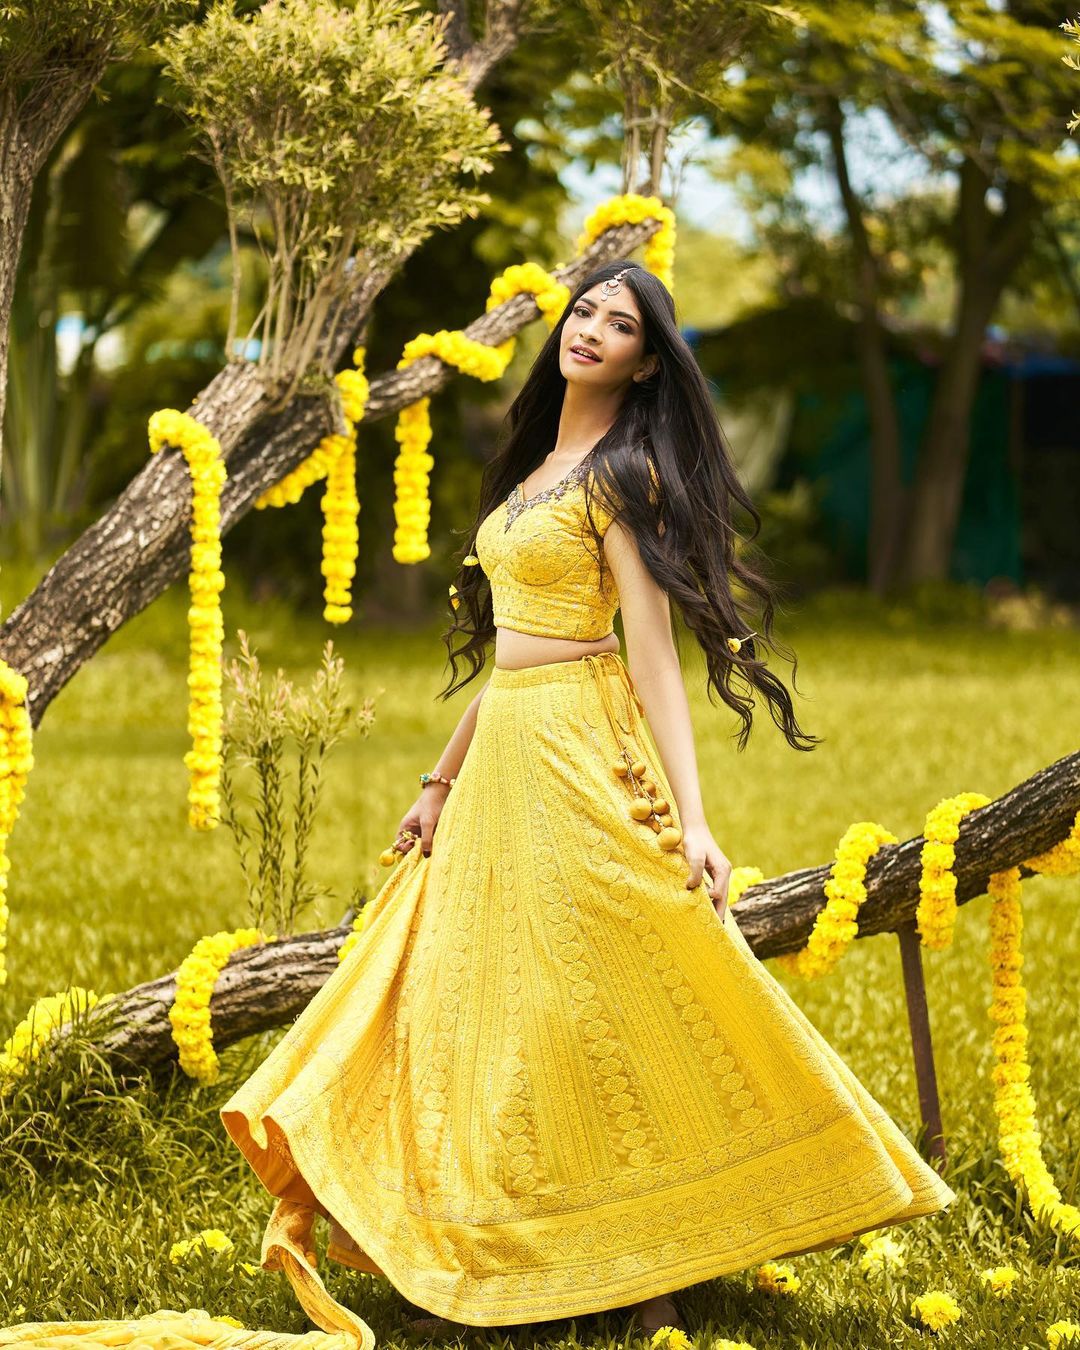 Neon is in trend and can be your color too for Haldi Ceremony for the bride